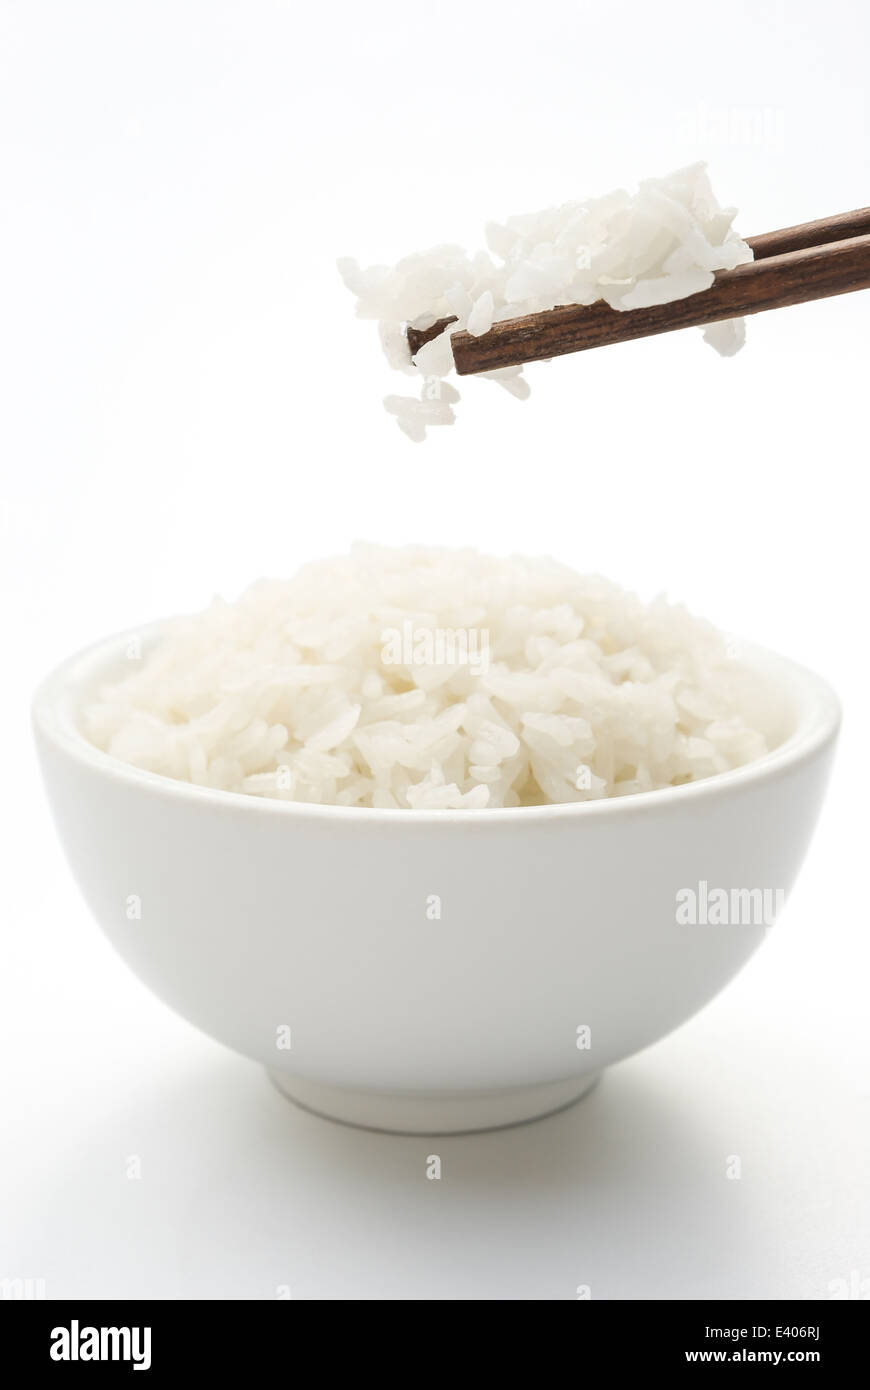 rice and chopstick on white with clipping path, vertical composition Stock Photo